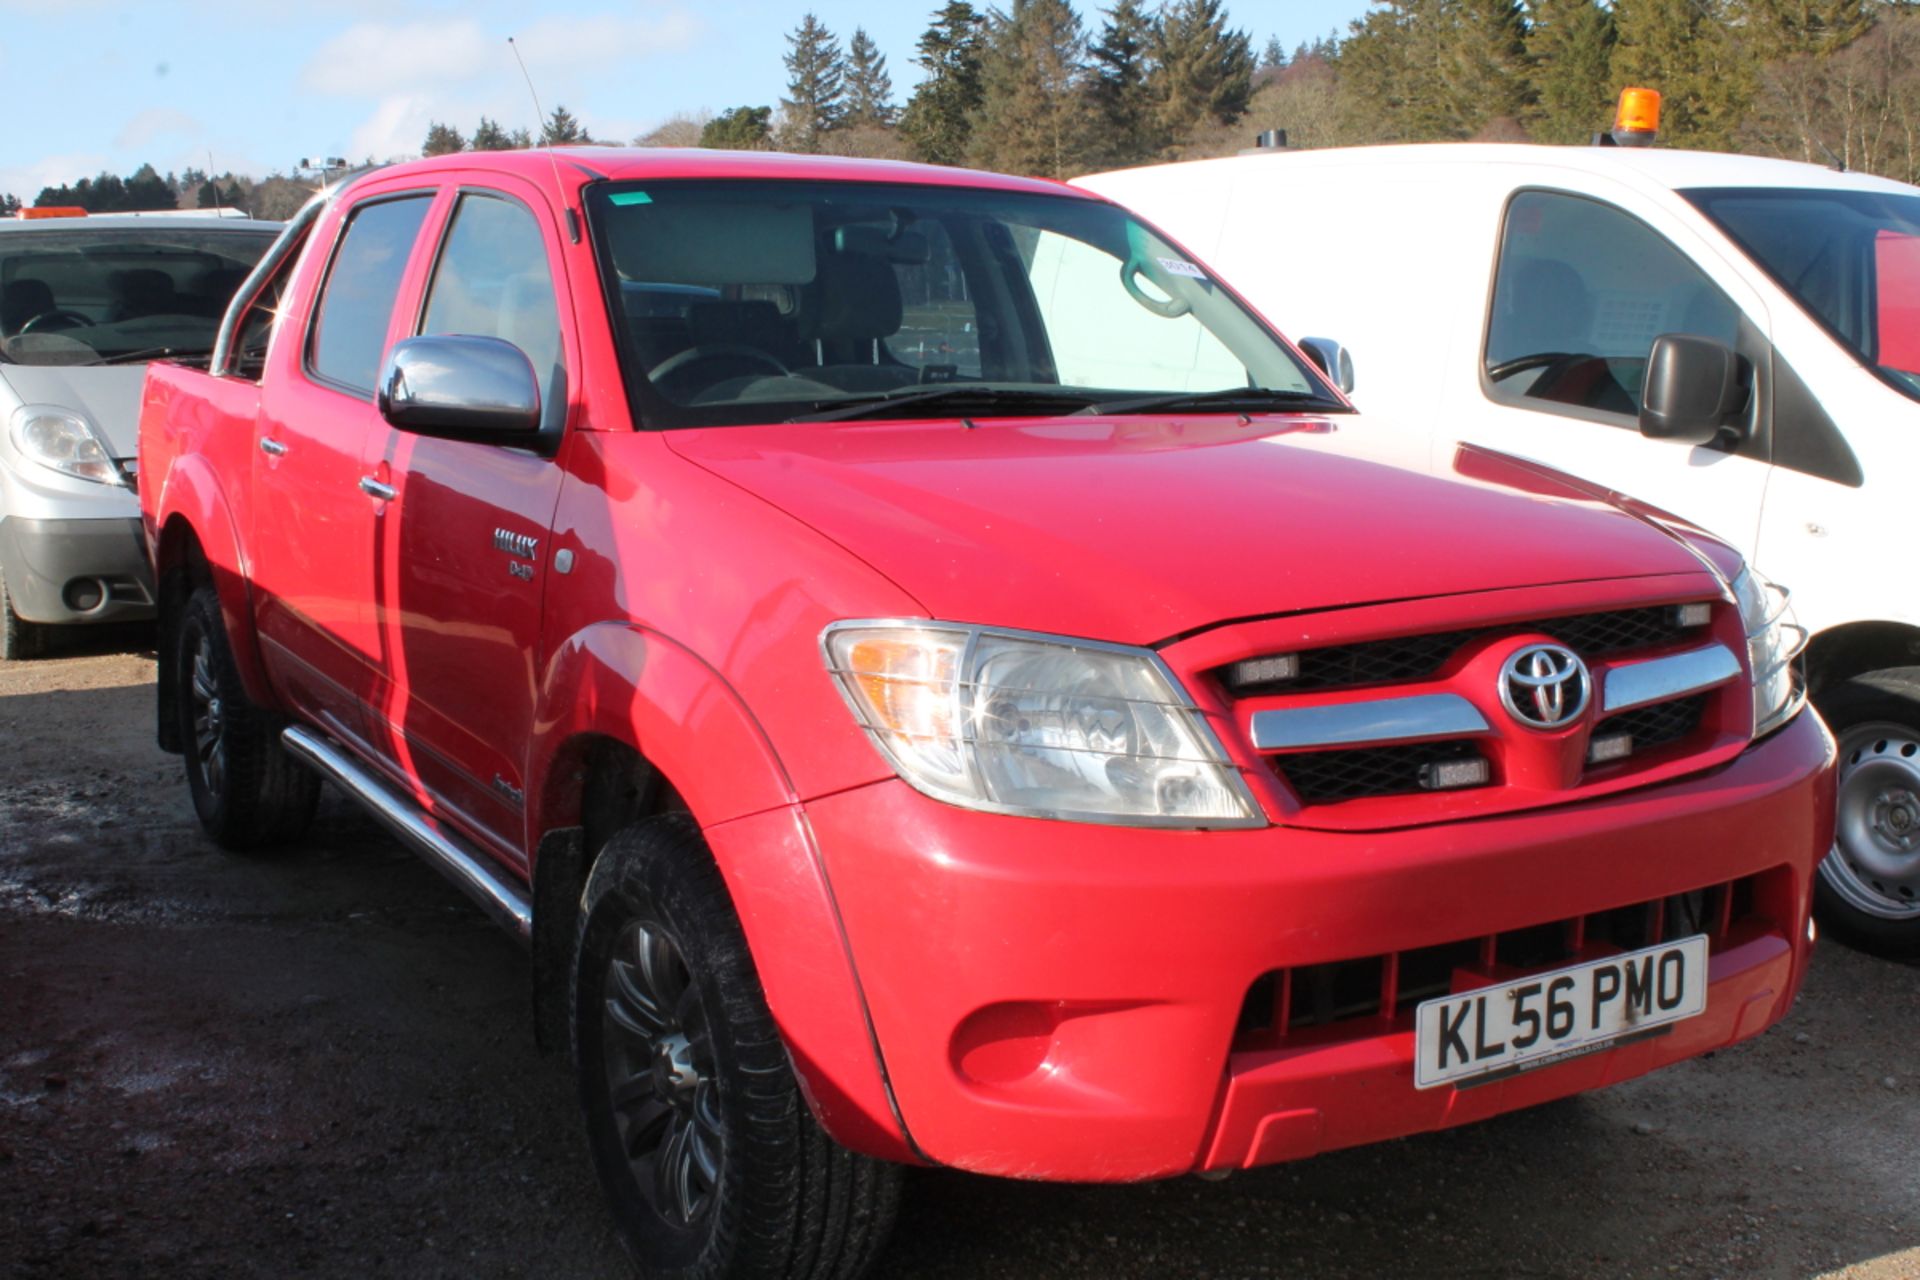 Toyota Hilux Invincible - 2494cc 4x4 - Image 2 of 3